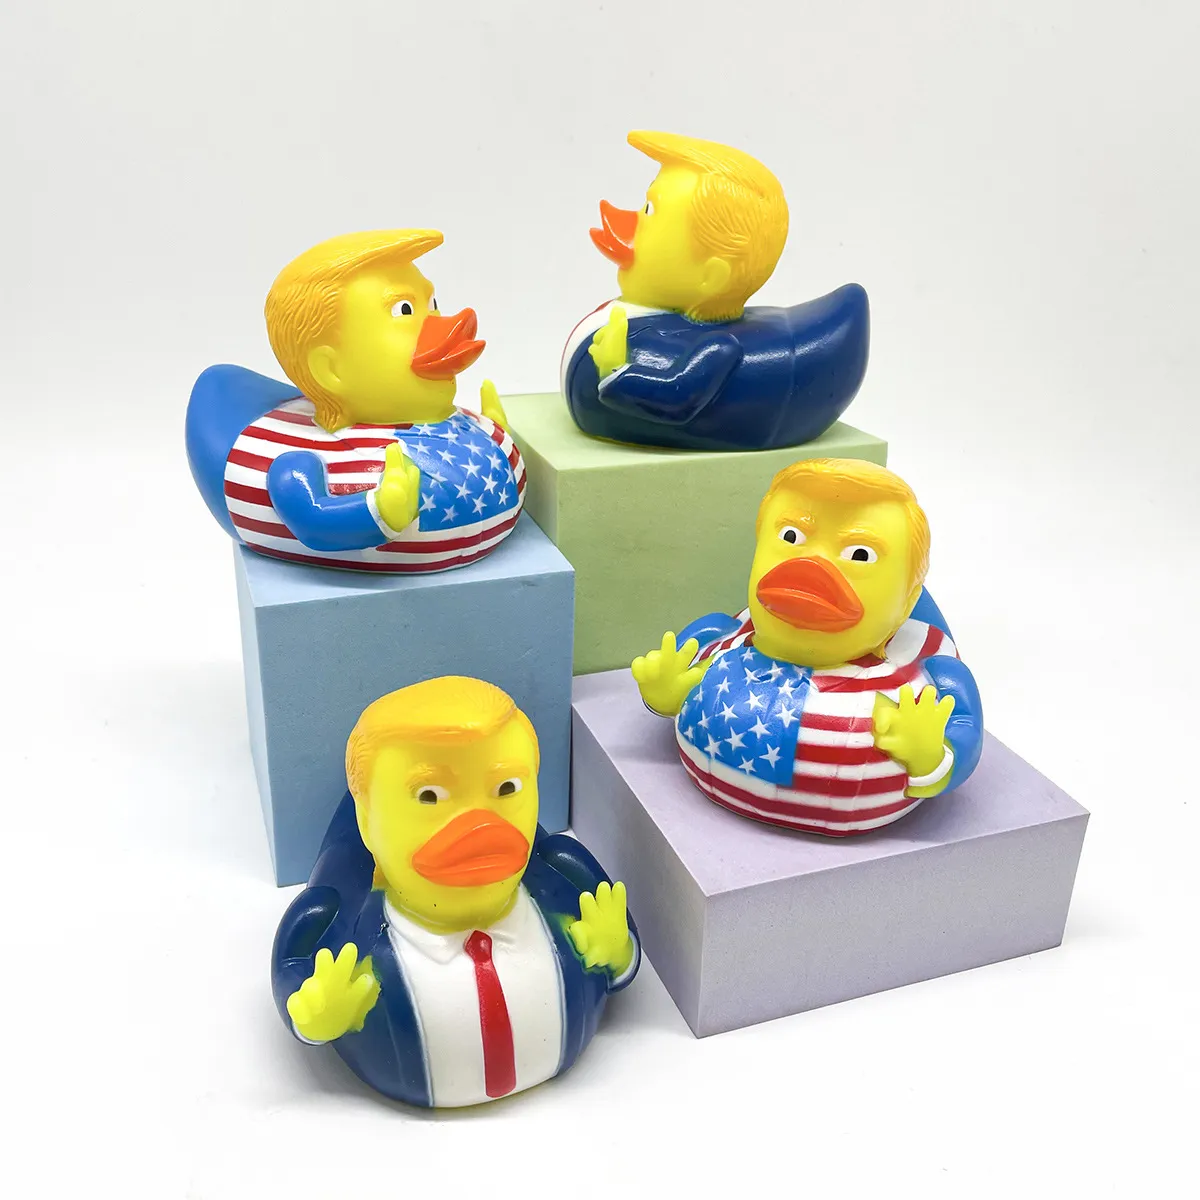 Trump Rubber Duck Baby Bath Floating Water Toy Duck Cute PVC Ducks Funny Duck Toys for Kids Gift Party Favor FY3683 0306